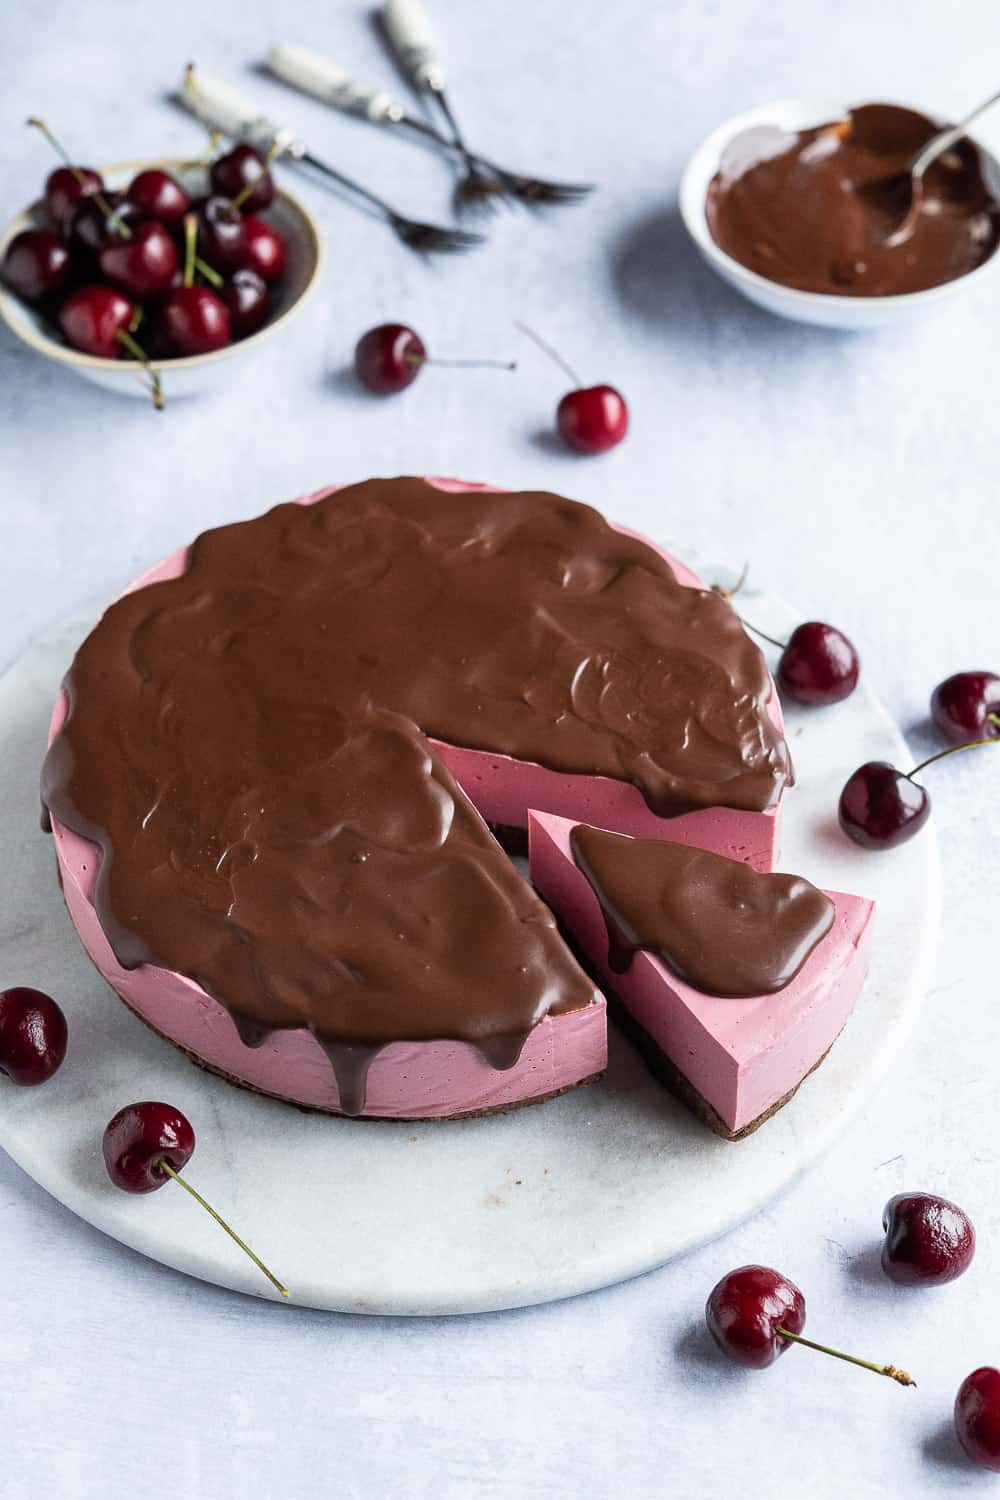 Cherry cheesecake with chocolate ganache and cherries on a marble platter.